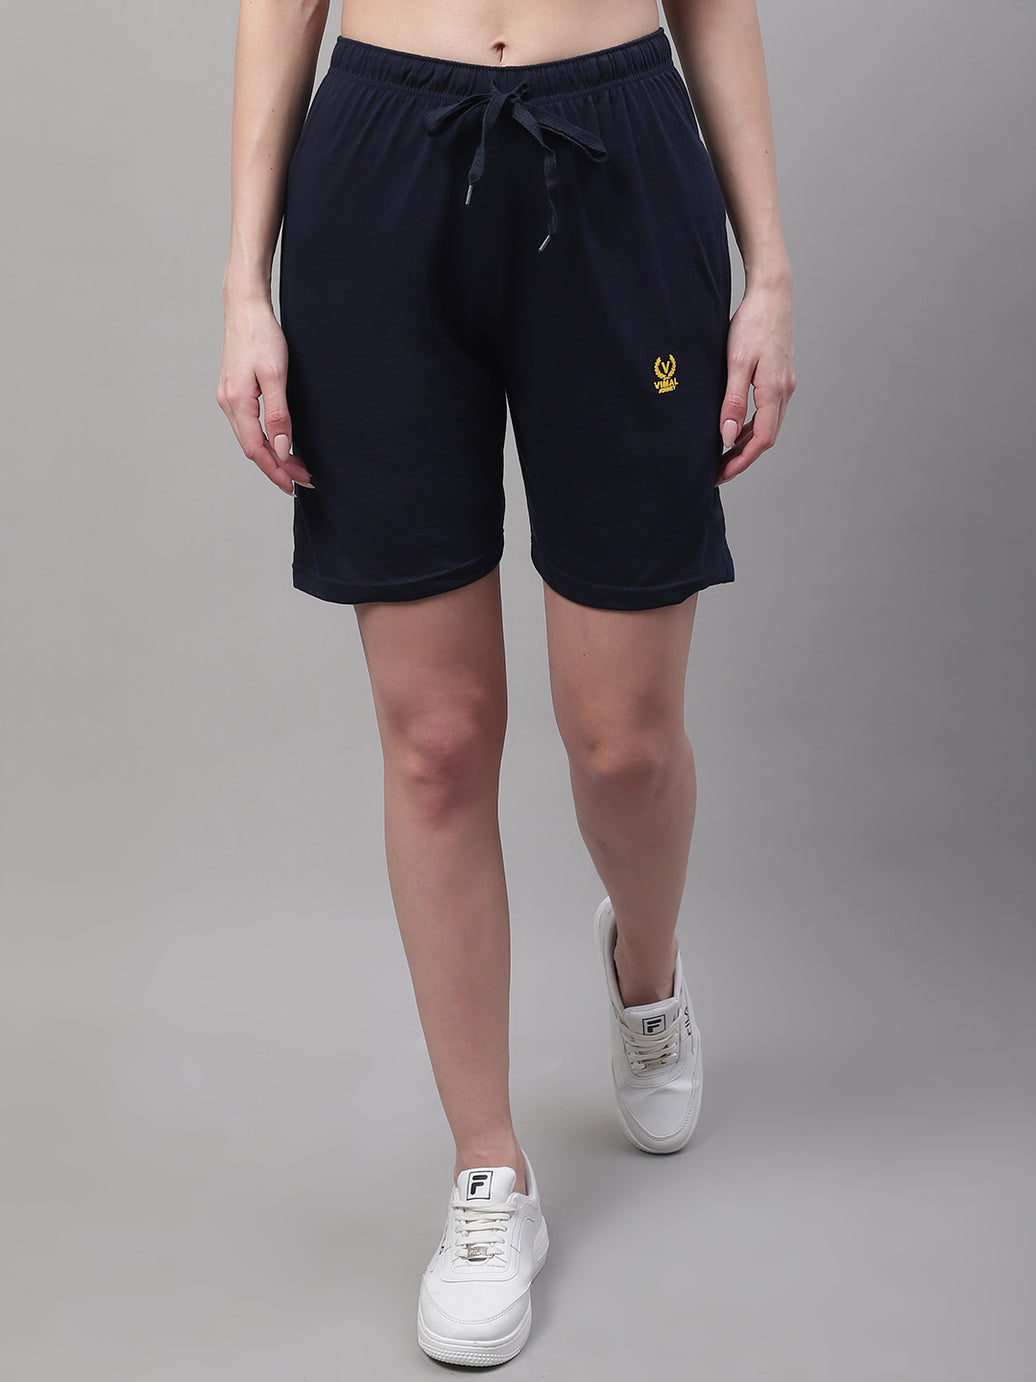 Buy Cotton 3/4 shorts for Women Online at VimalClothing